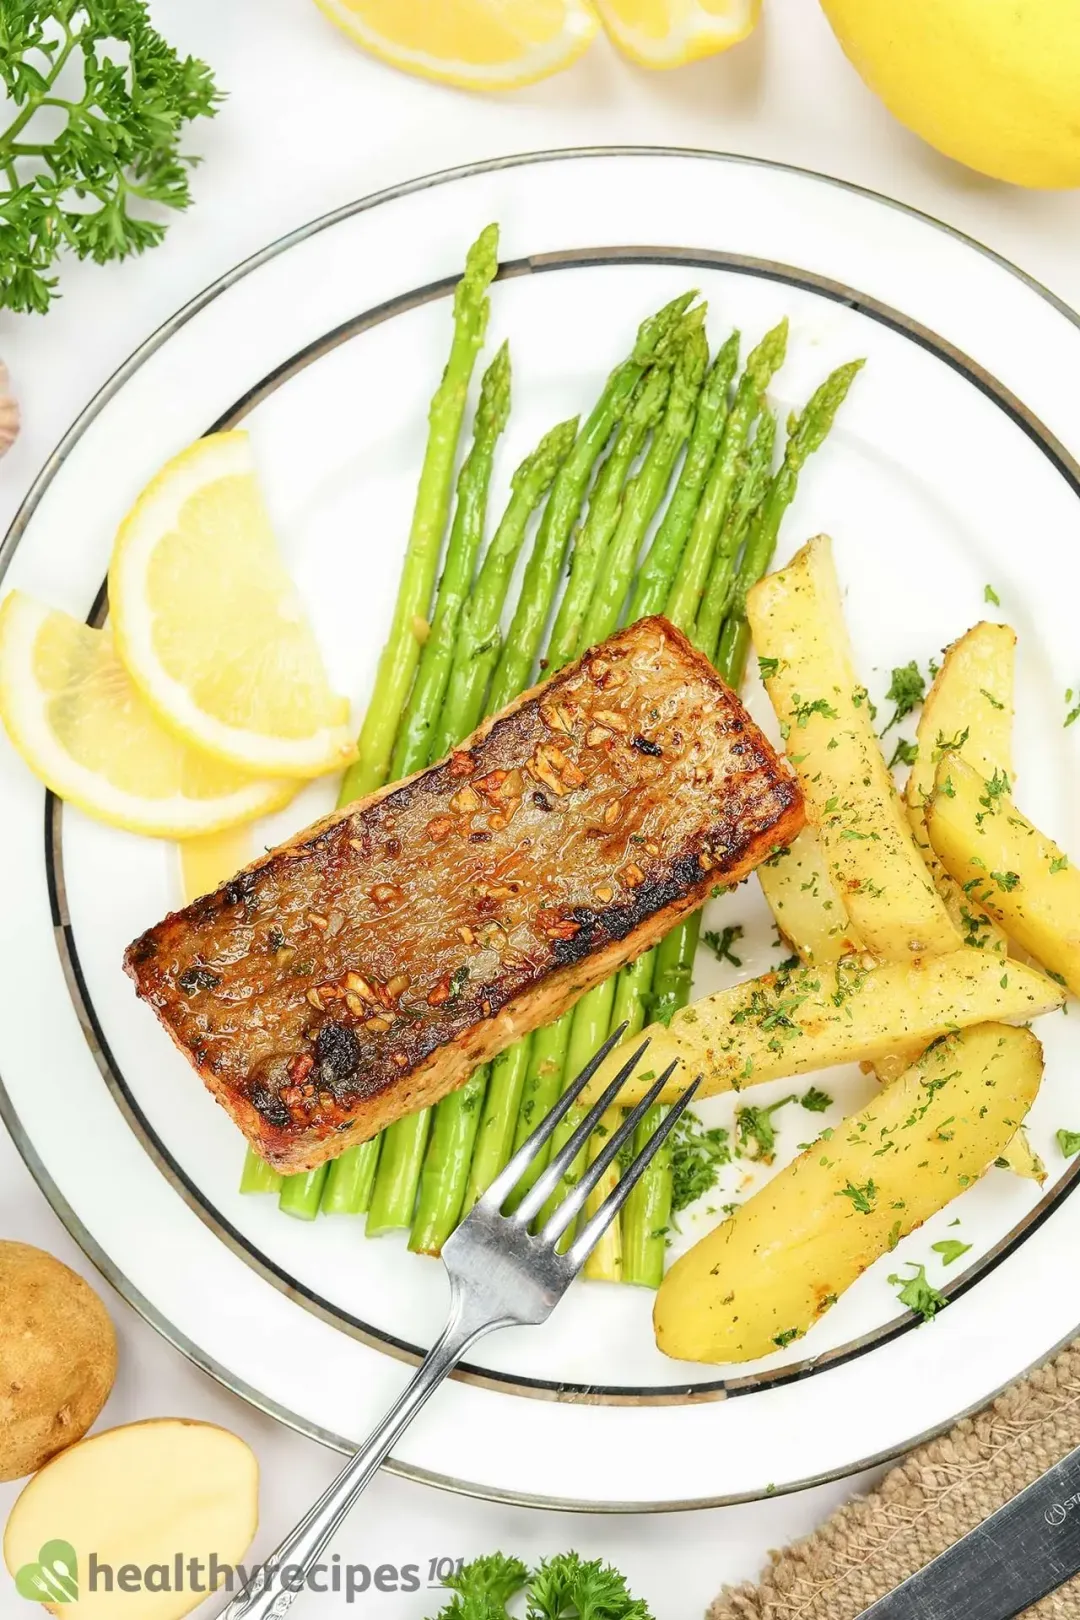 A fork laid on a plate containing a pan-seared salmon fillet, potato wedges covered in parsley, asparagus stalks, and two lemon slices